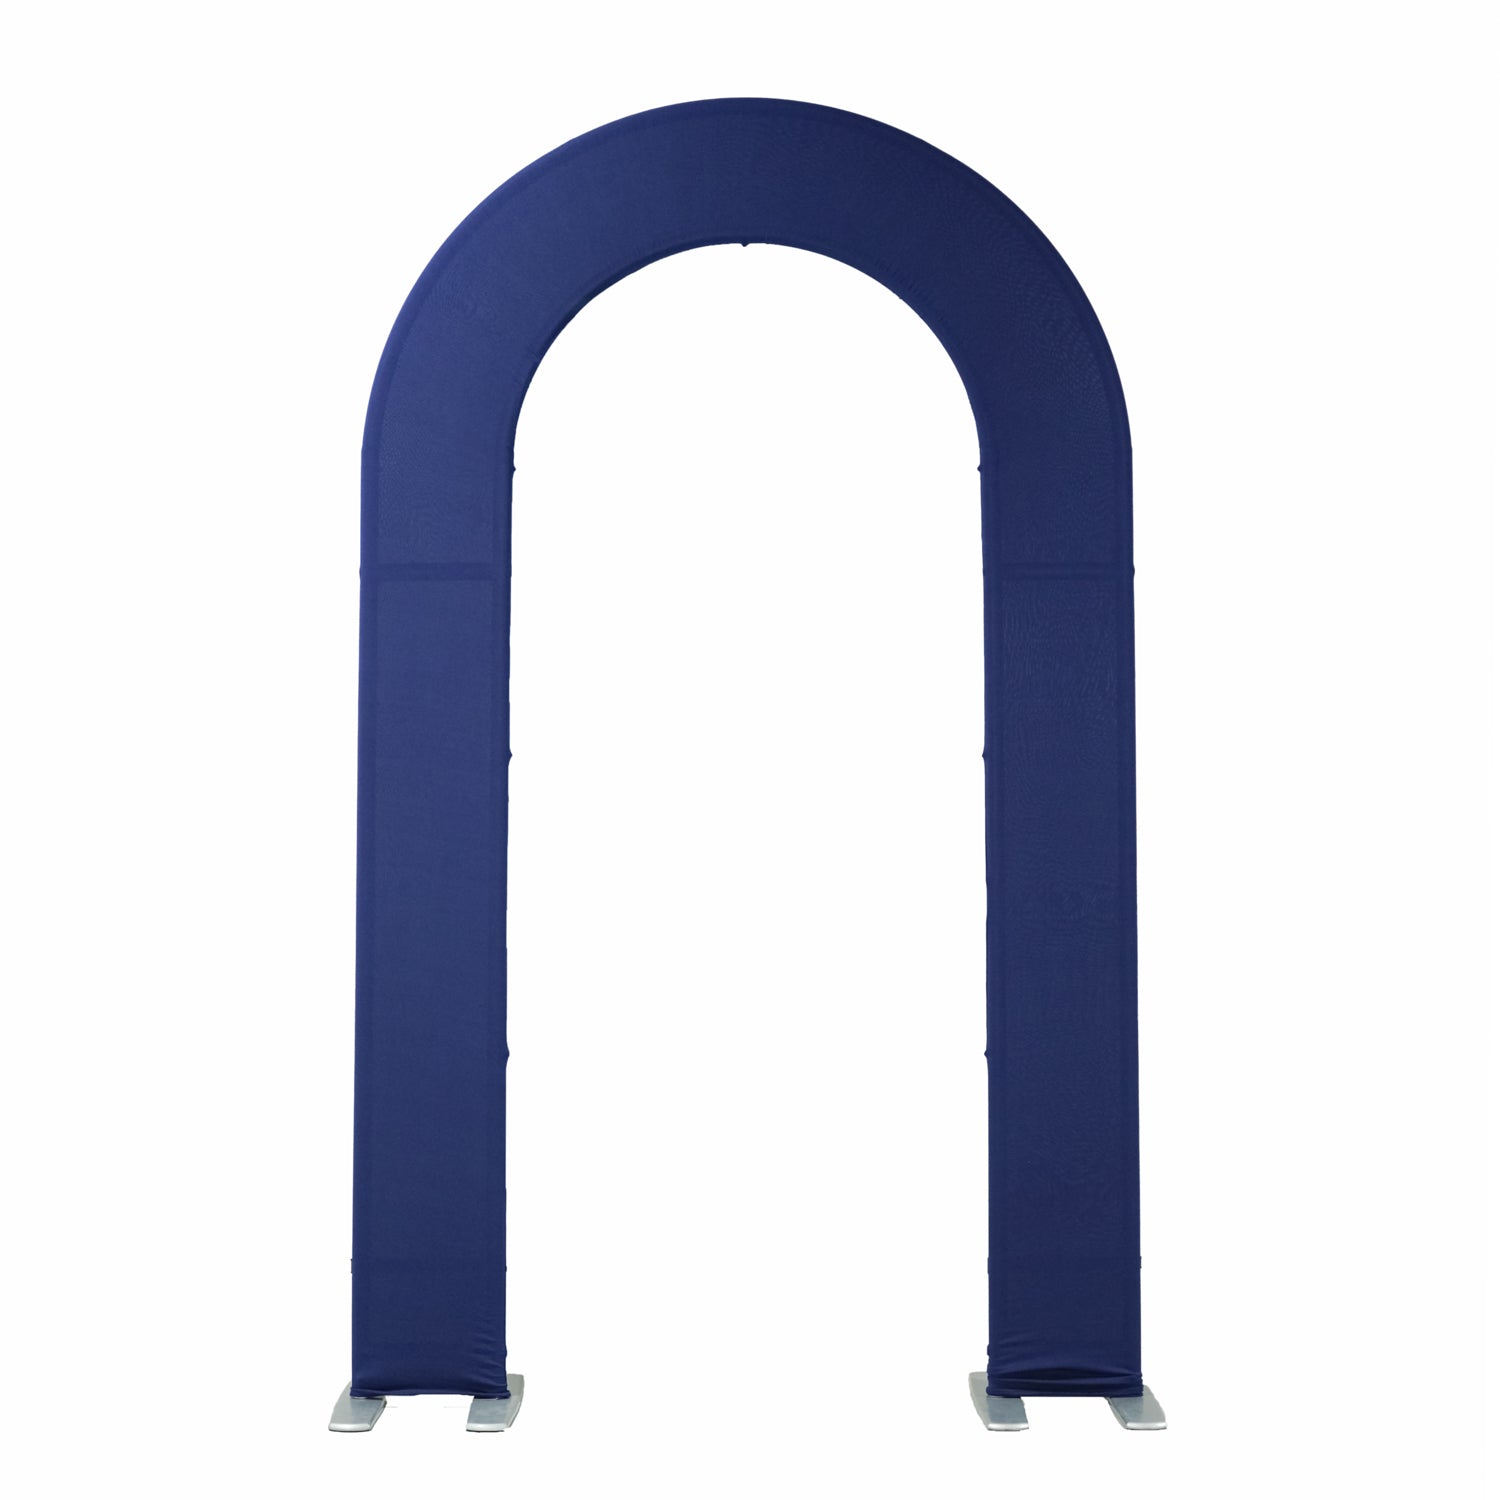 Open Center Spandex Arch Cover - Navy Blue